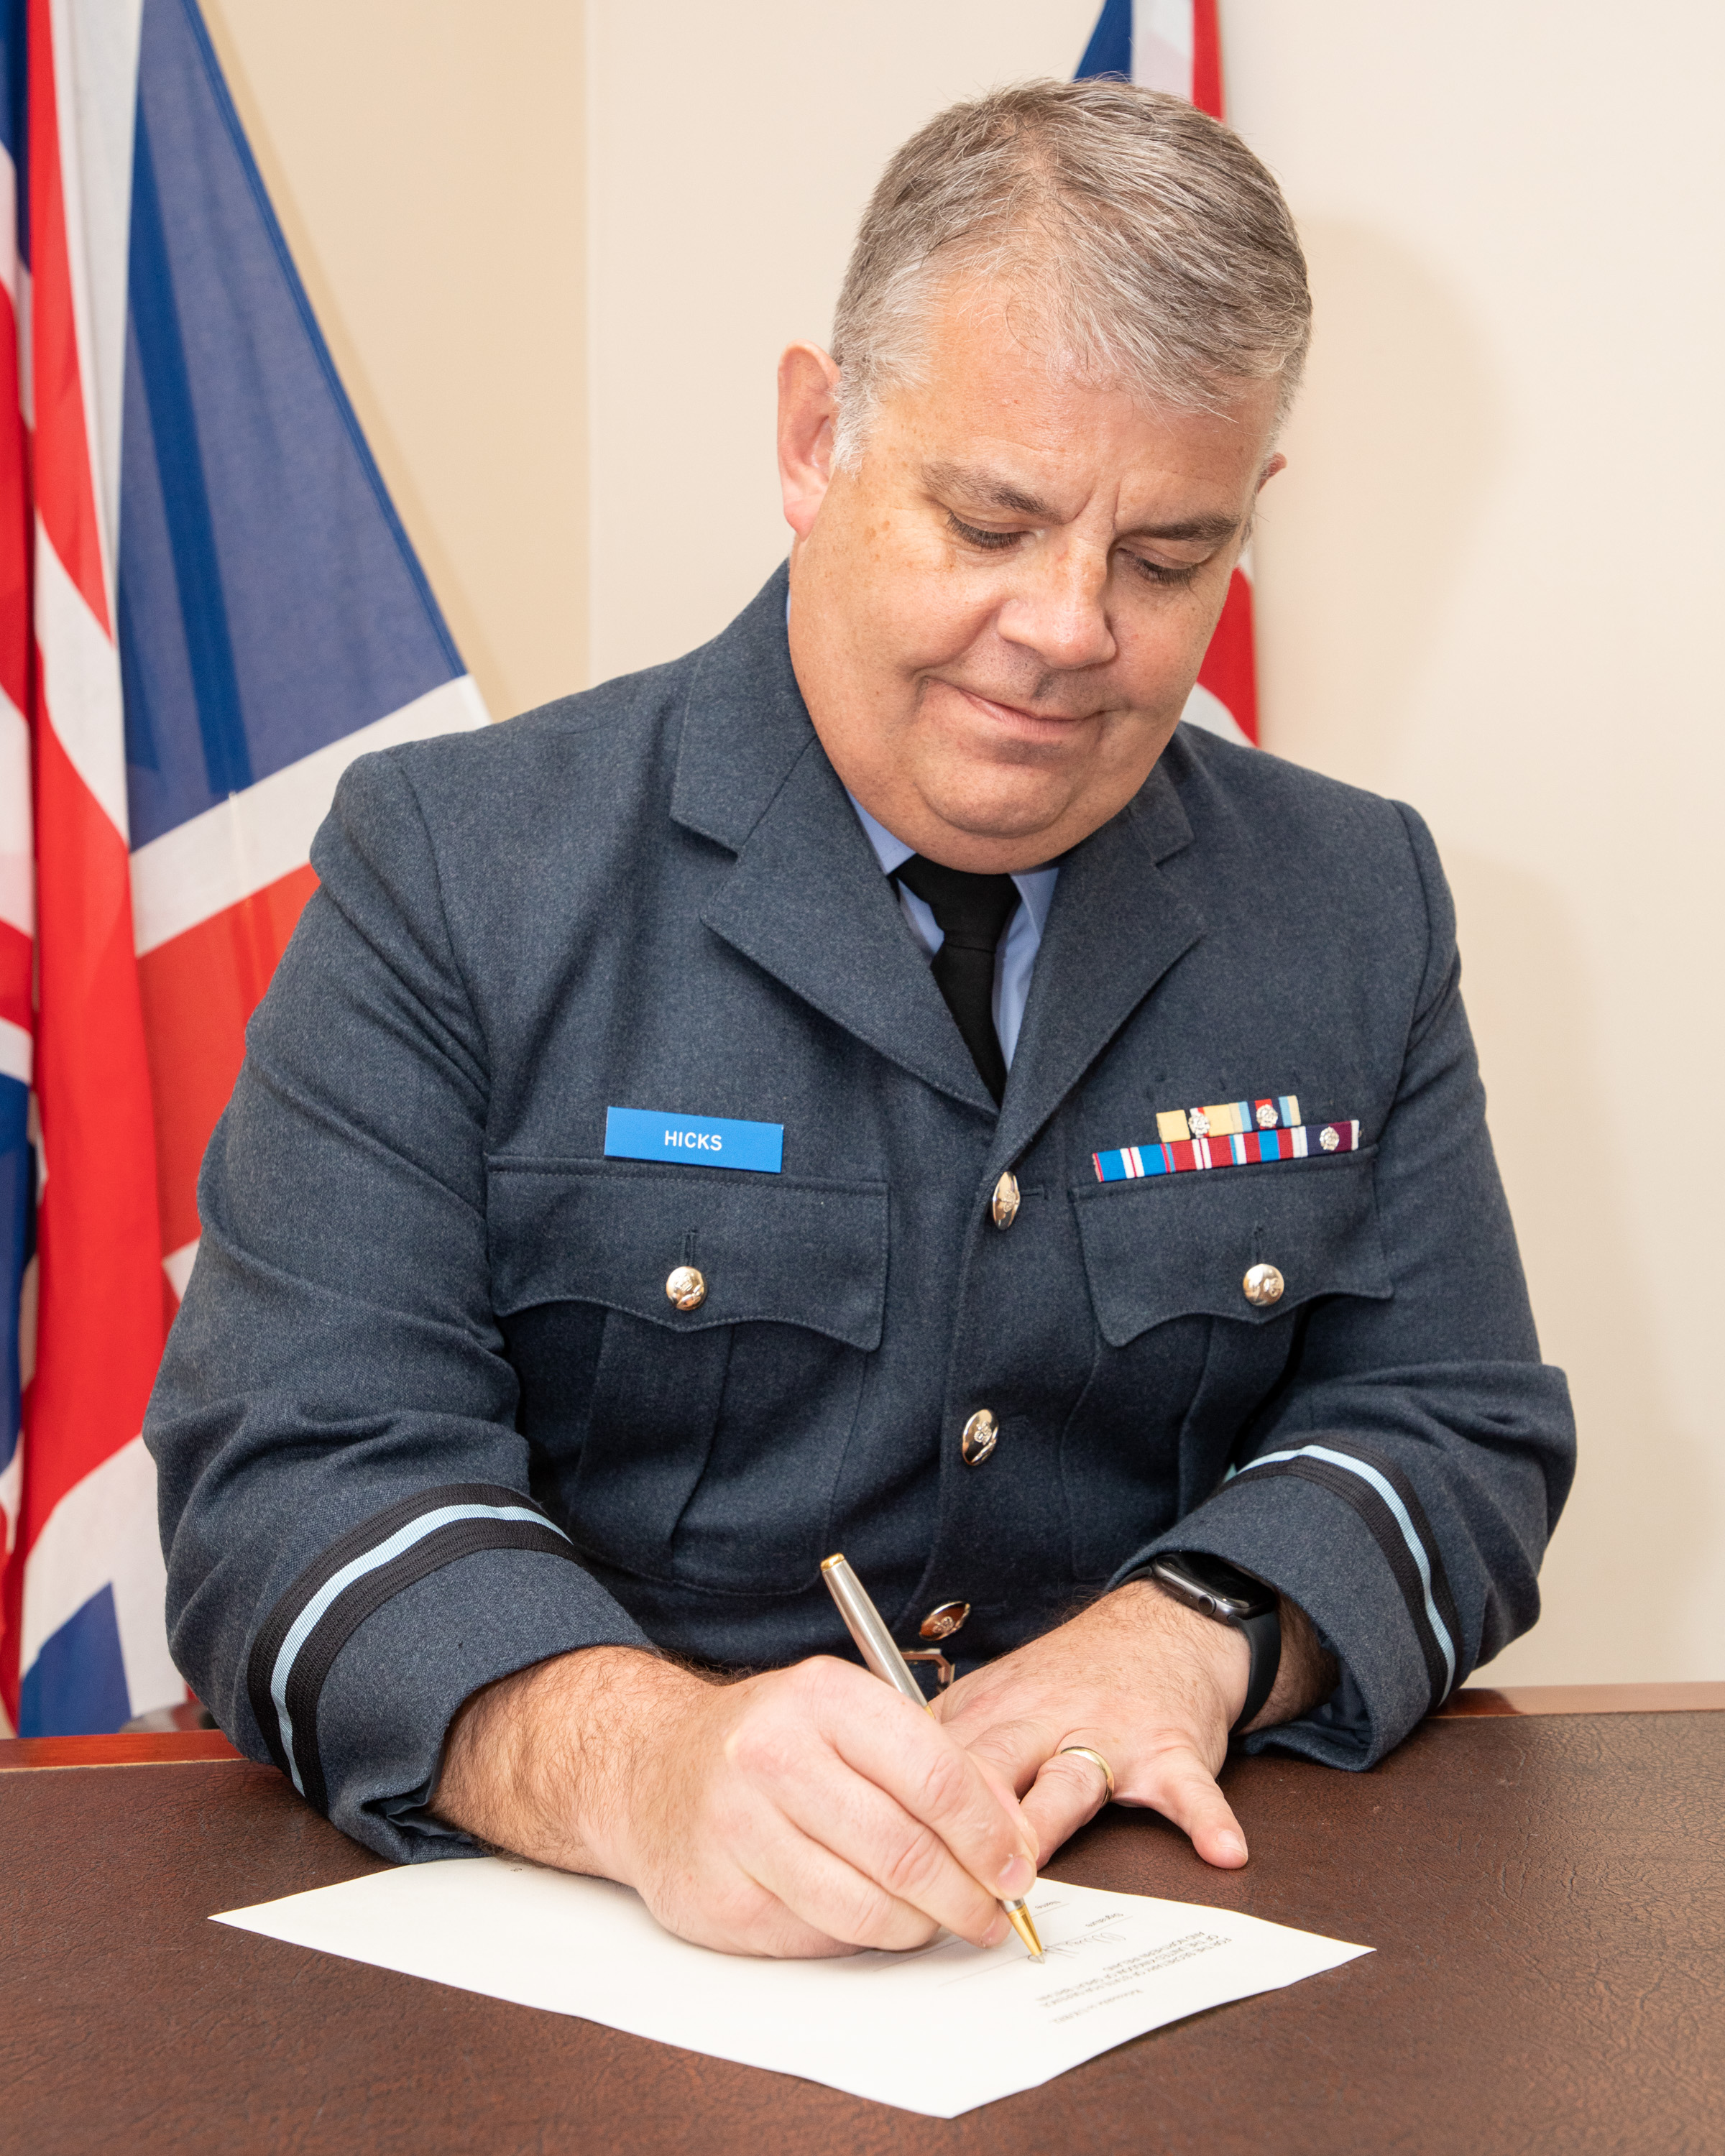 Image shows RAF personnel signing agreement.